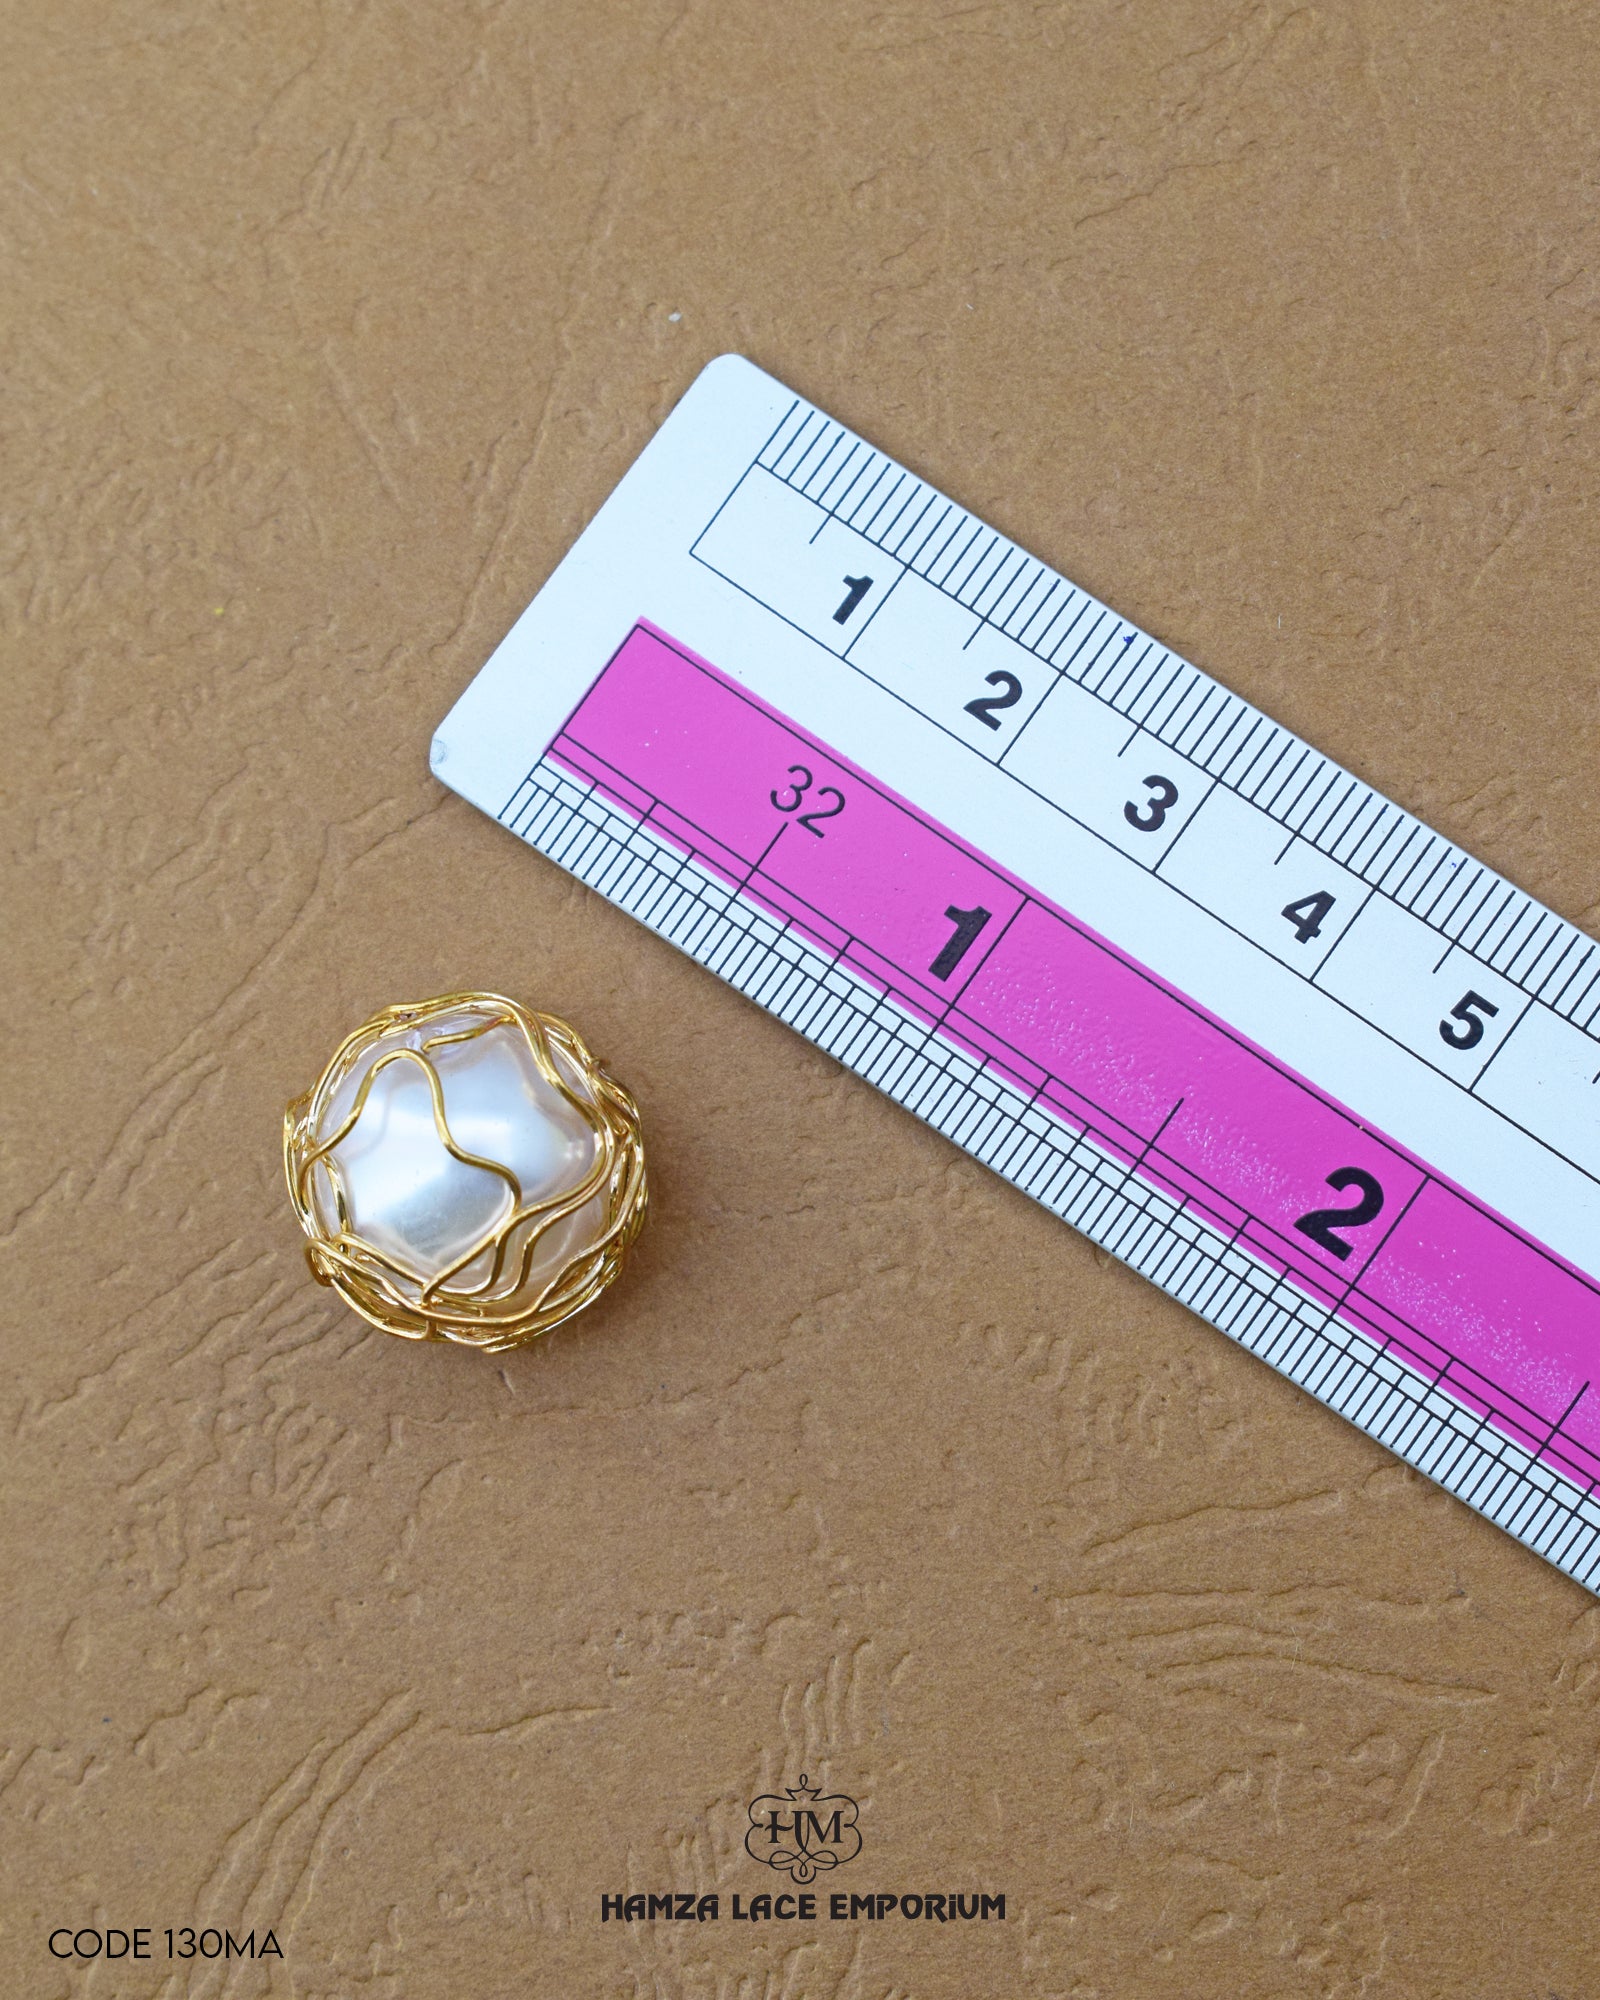 The size of the 'Pearl Design Metal Accessory MA130' is indicated using a ruler.